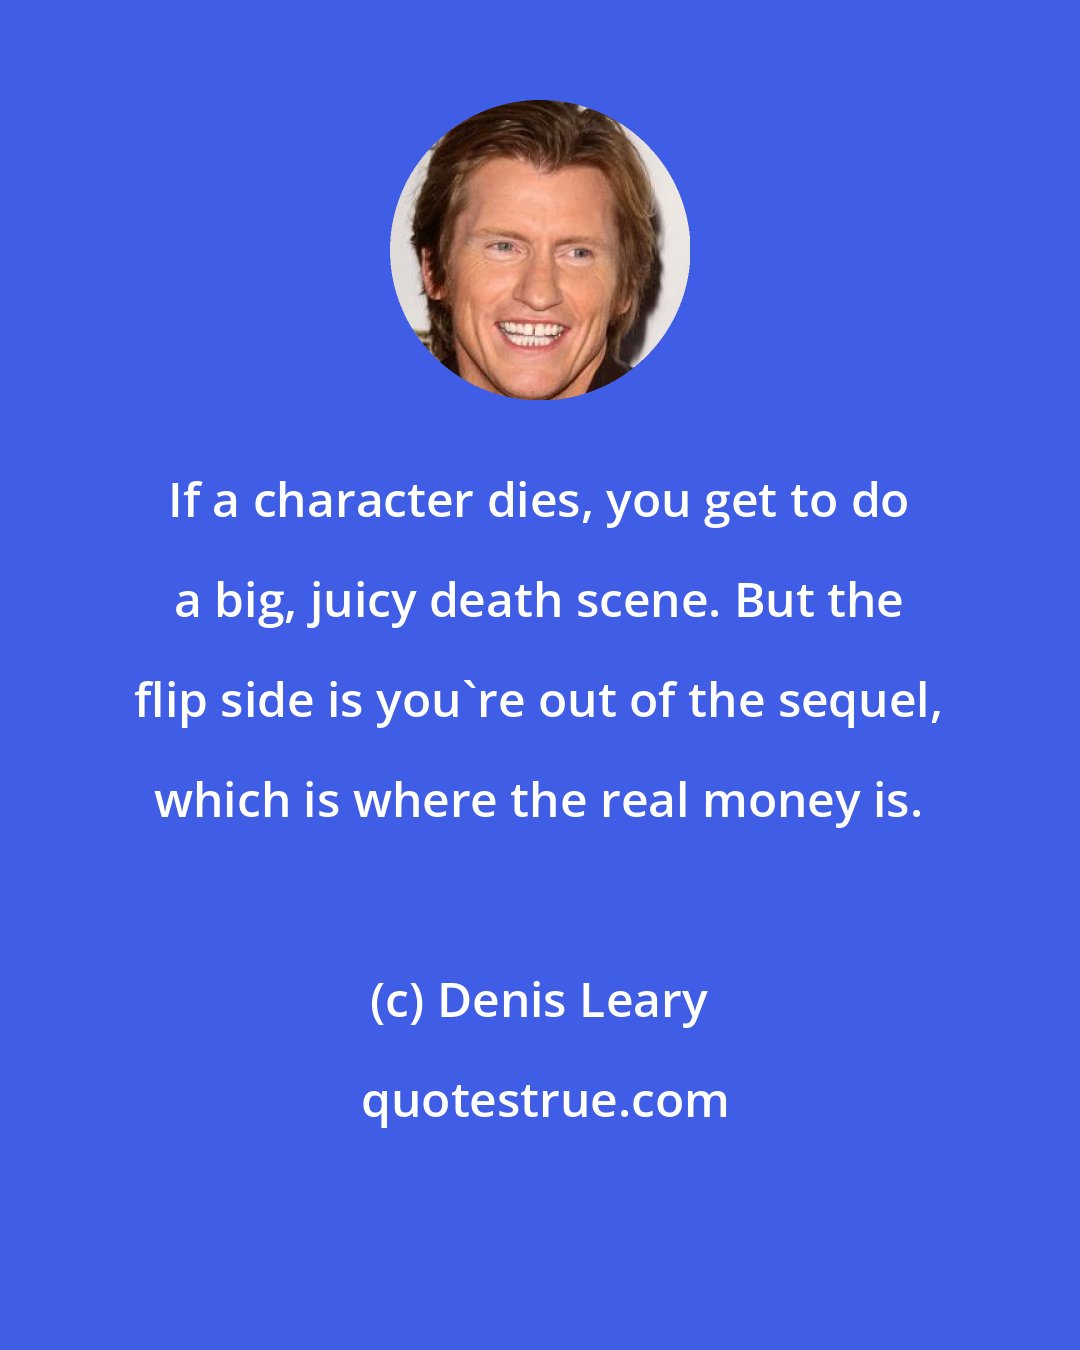 Denis Leary: If a character dies, you get to do a big, juicy death scene. But the flip side is you're out of the sequel, which is where the real money is.